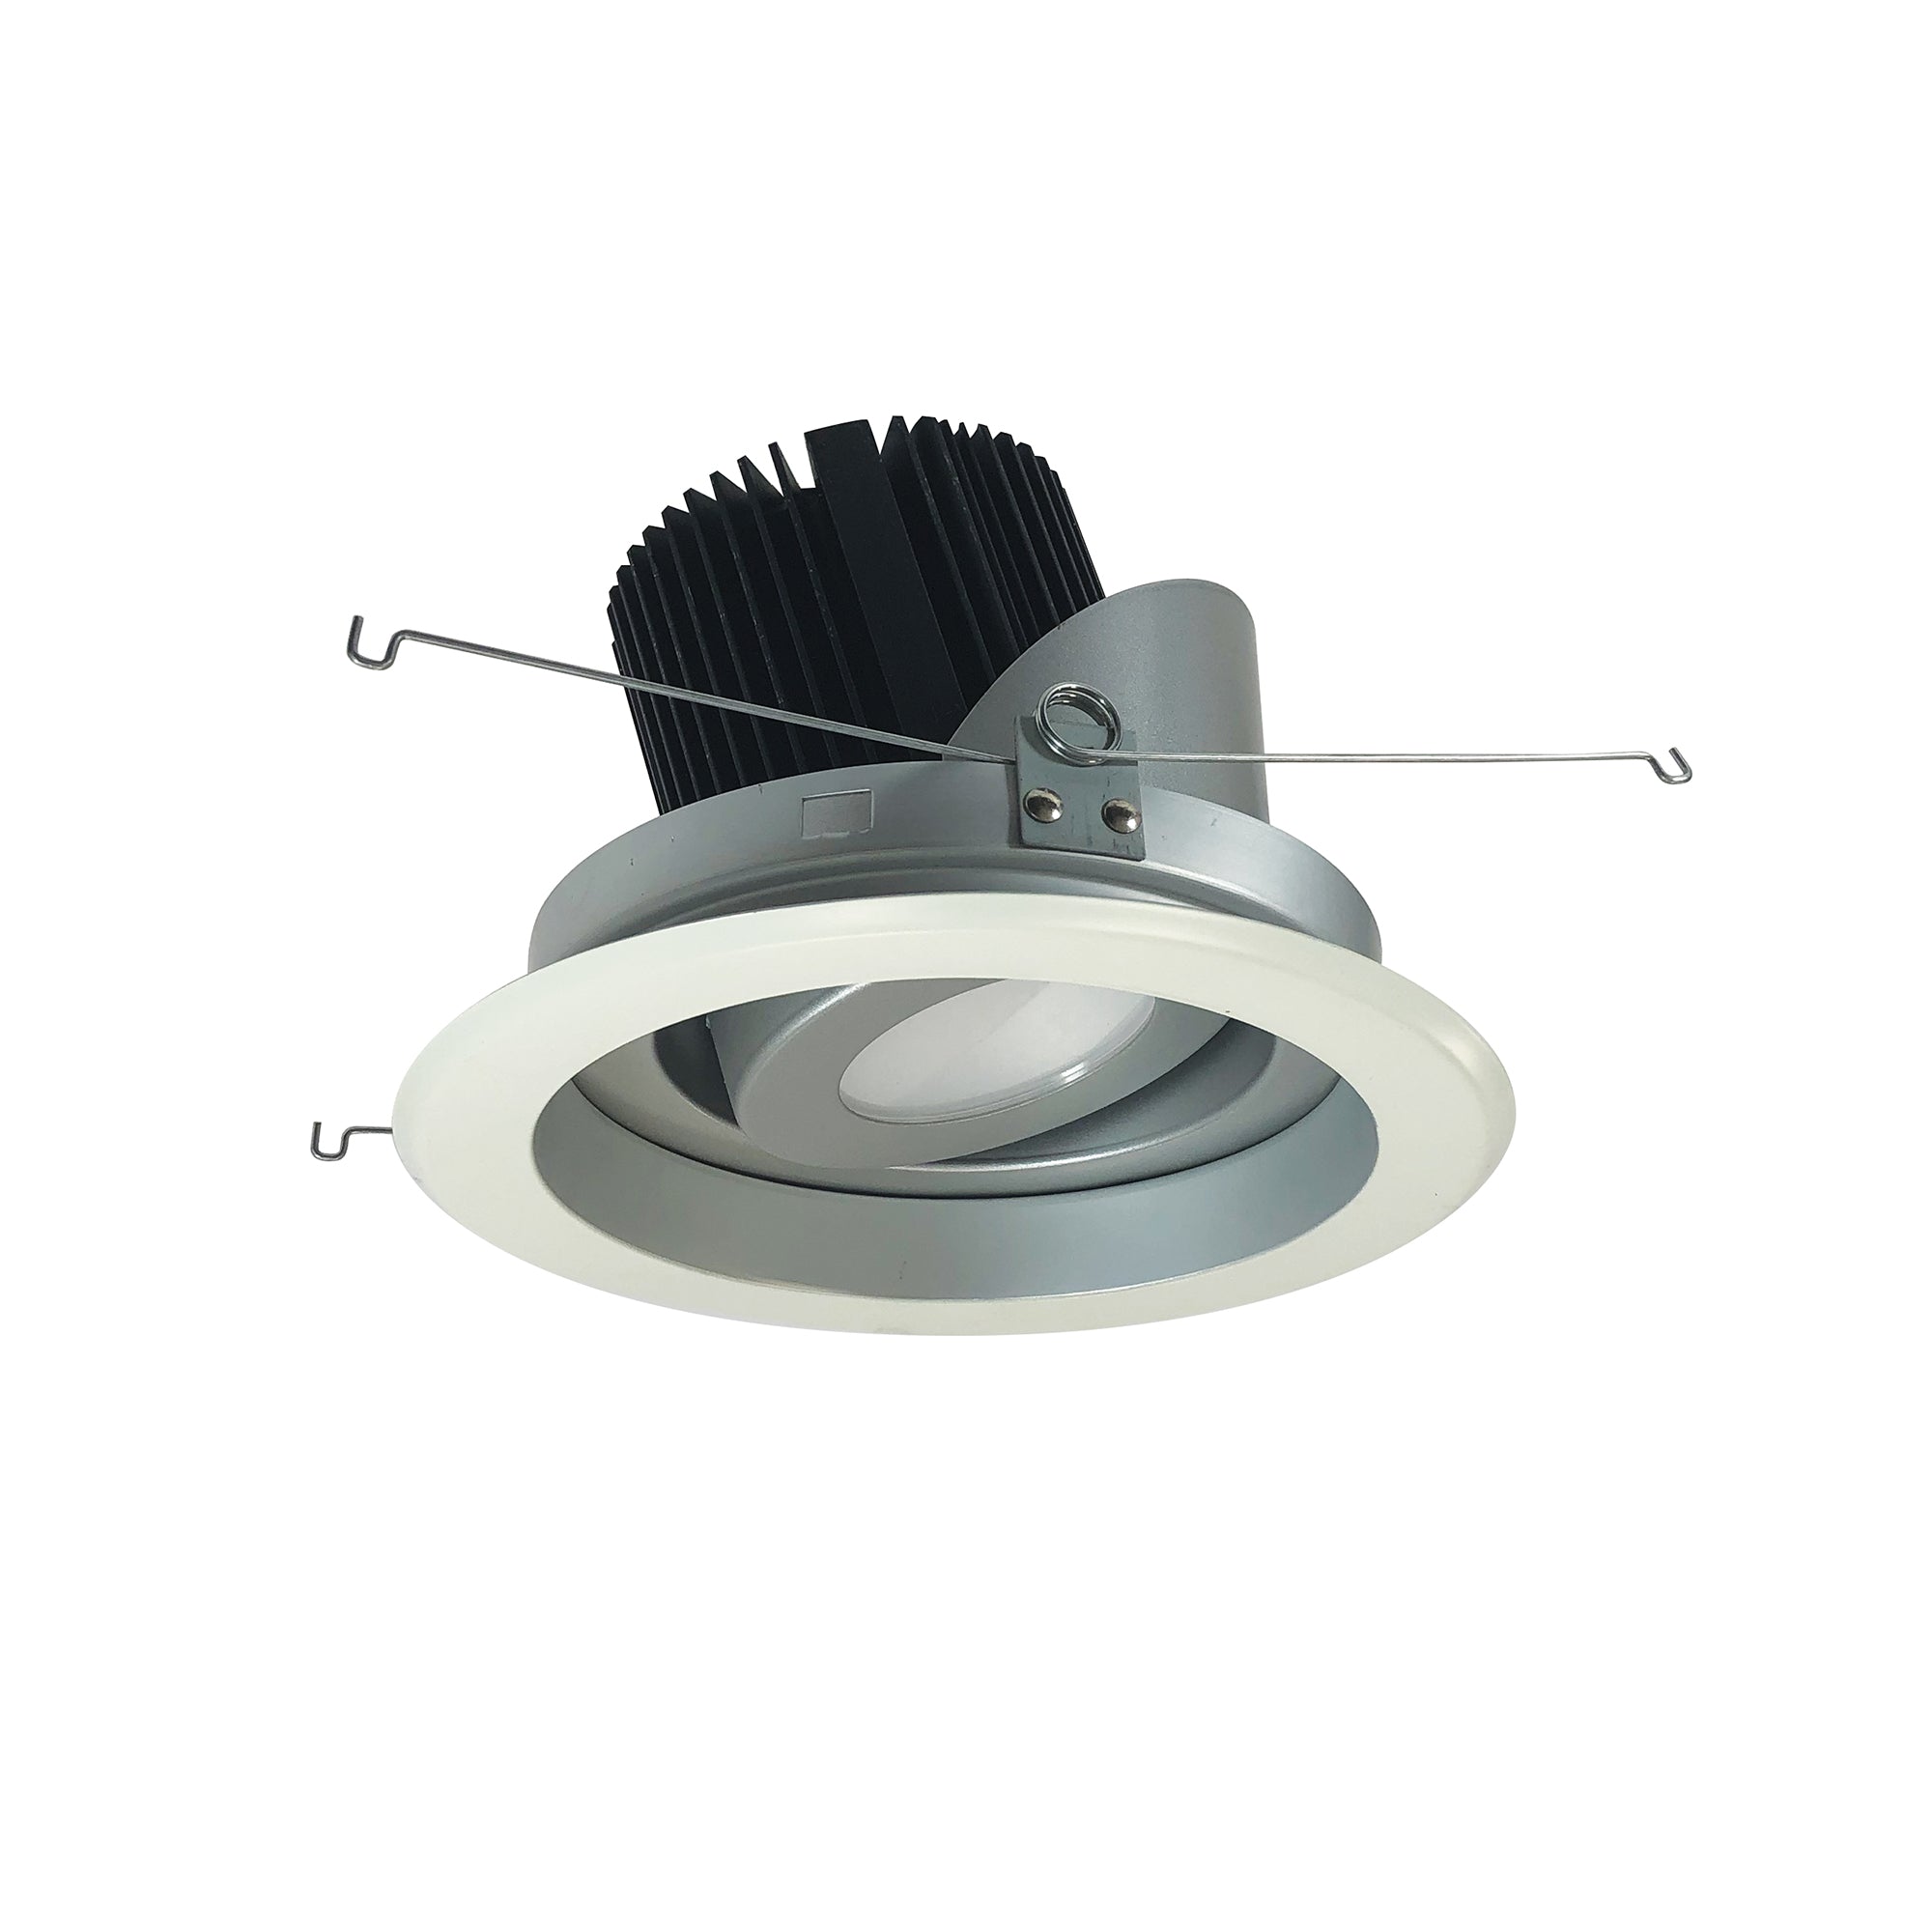 Nora Lighting NRM2-619L2535FHZW - Recessed - 6 Inch Marquise II Round Regressed Adj. Reflector, Flood, 2500lm, 3500K, Haze/White (Not Compatible with NHRM2-625 Housings)